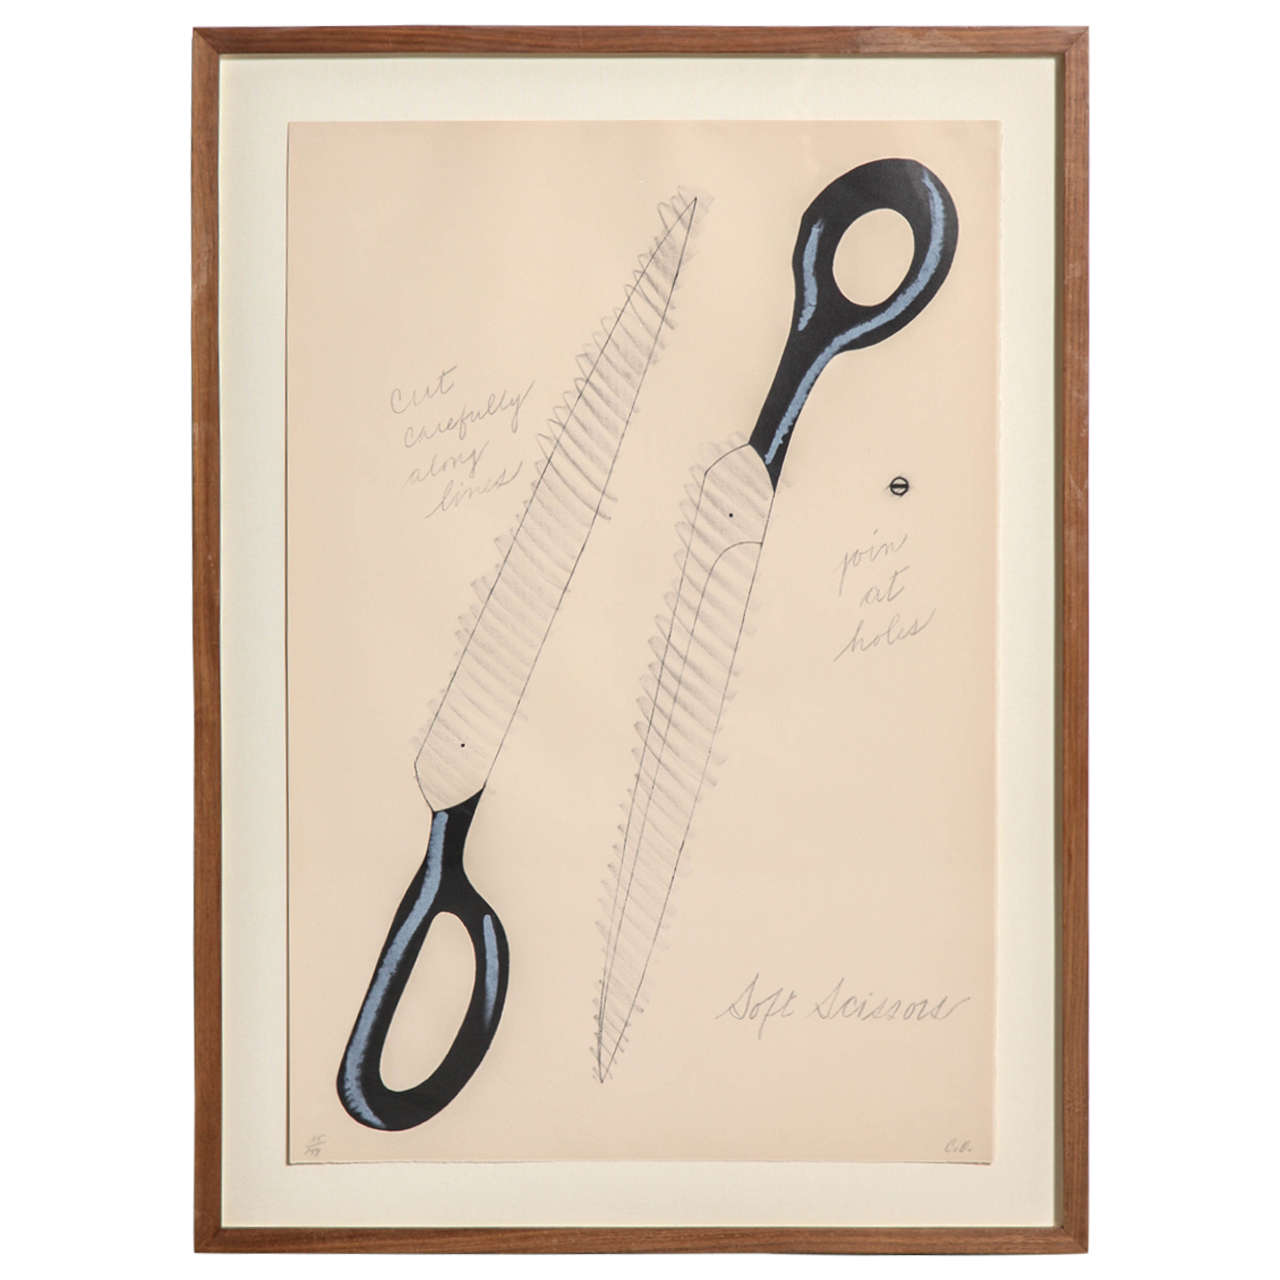 Claes Oldenberg Framed Lithograph, Scissors to Cut-Out (1968)